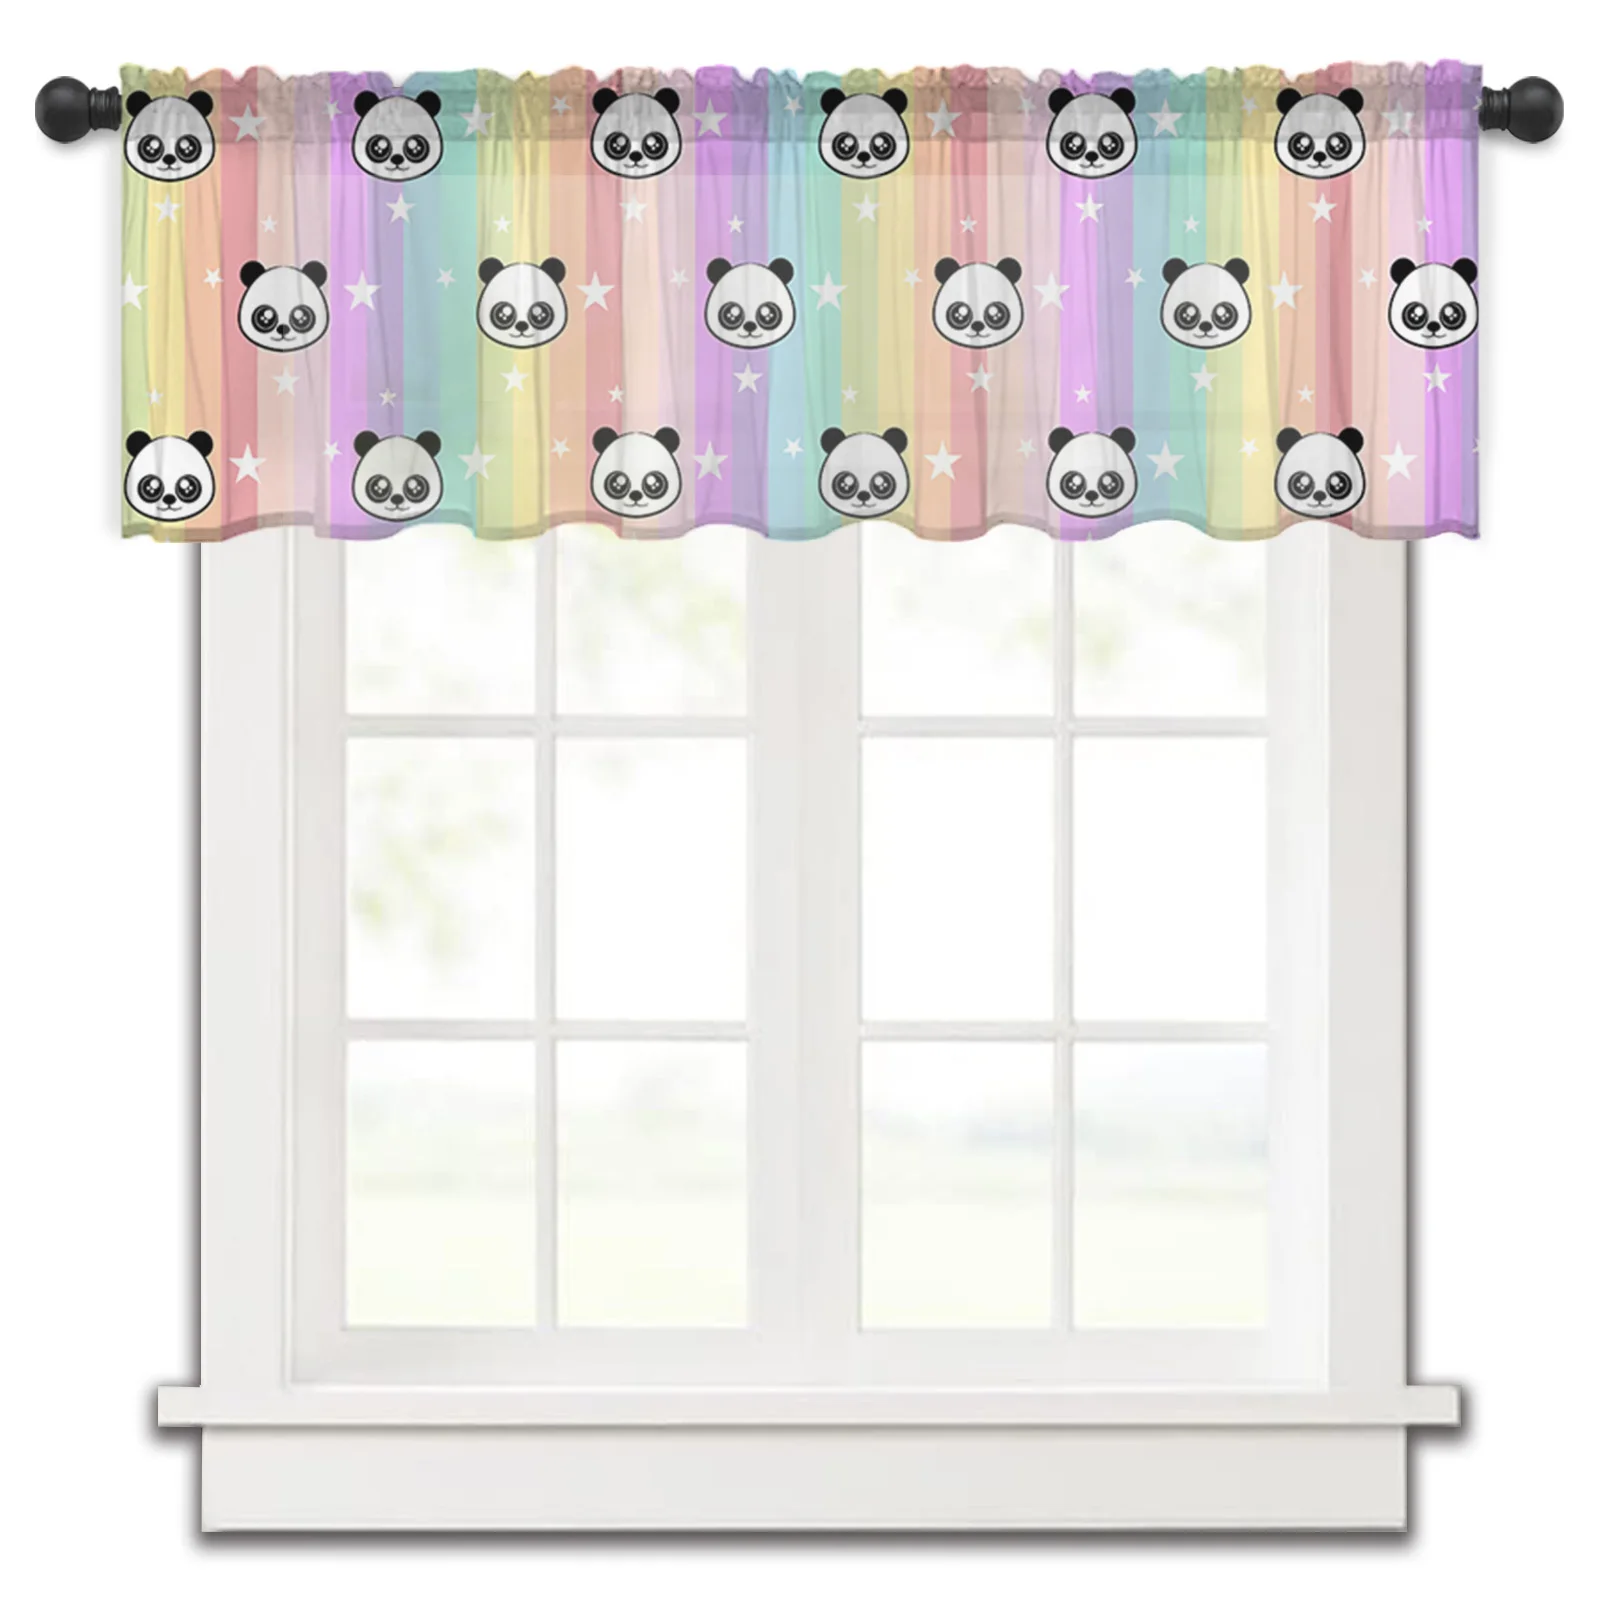 

Panda Stars Rainbow Stripes Kitchen Small Window Curtain Tulle Sheer Short Curtain Bedroom Living Room Home Decor Voile Drapes